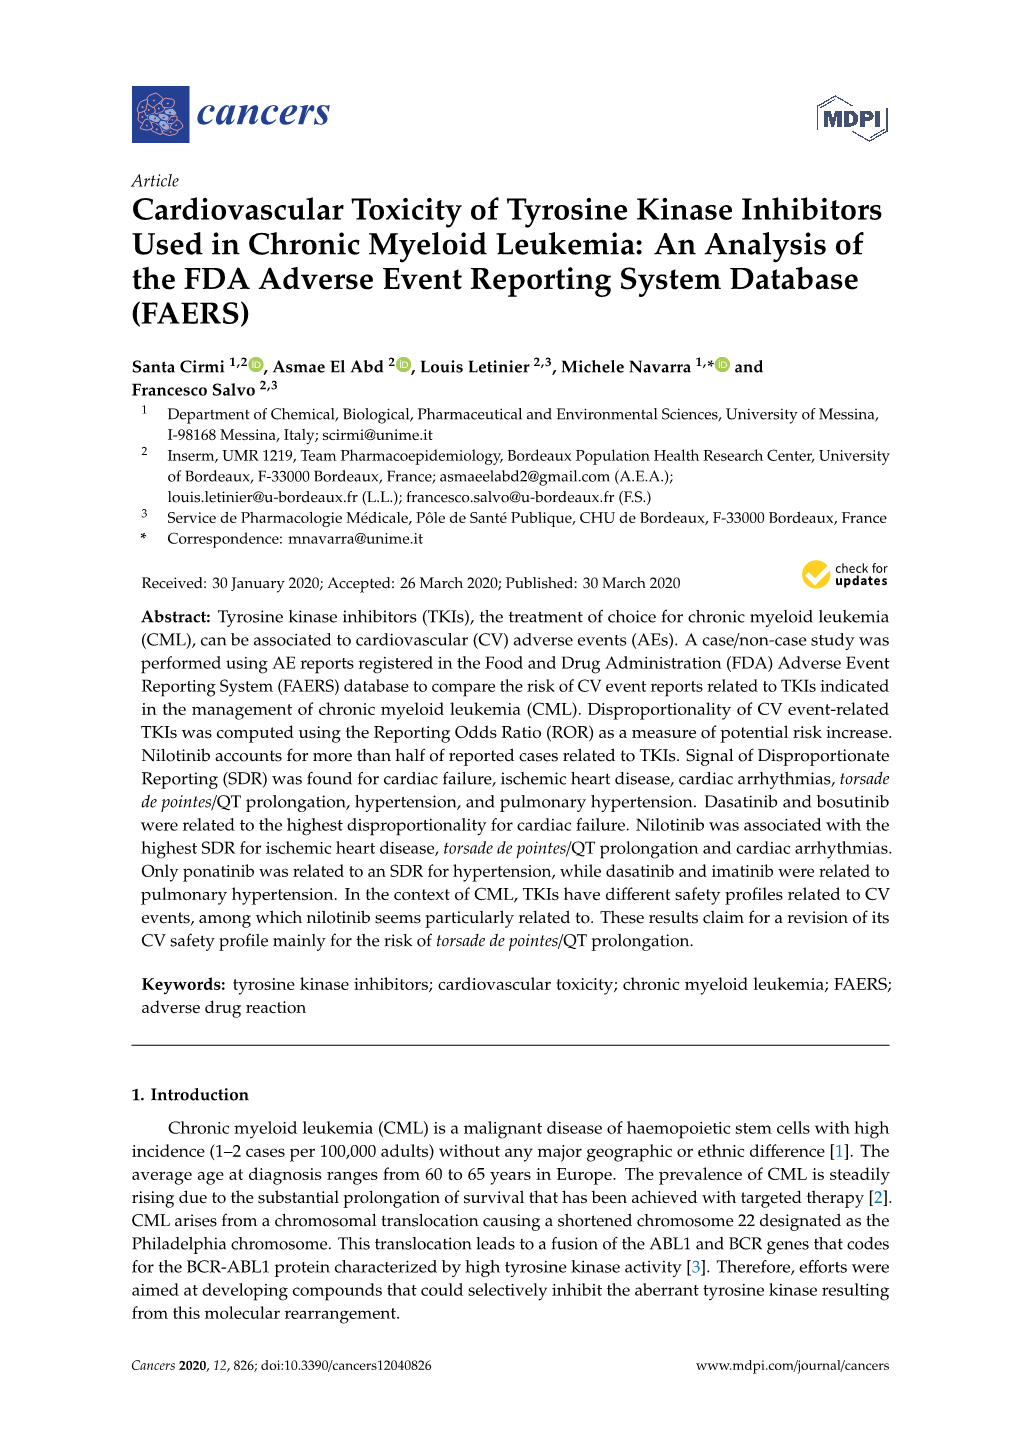 Cardiovascular Toxicity of Tyrosine Kinase Inhibitors Used in Chronic Myeloid Leukemia: an Analysis of the FDA Adverse Event Reporting System Database (FAERS)